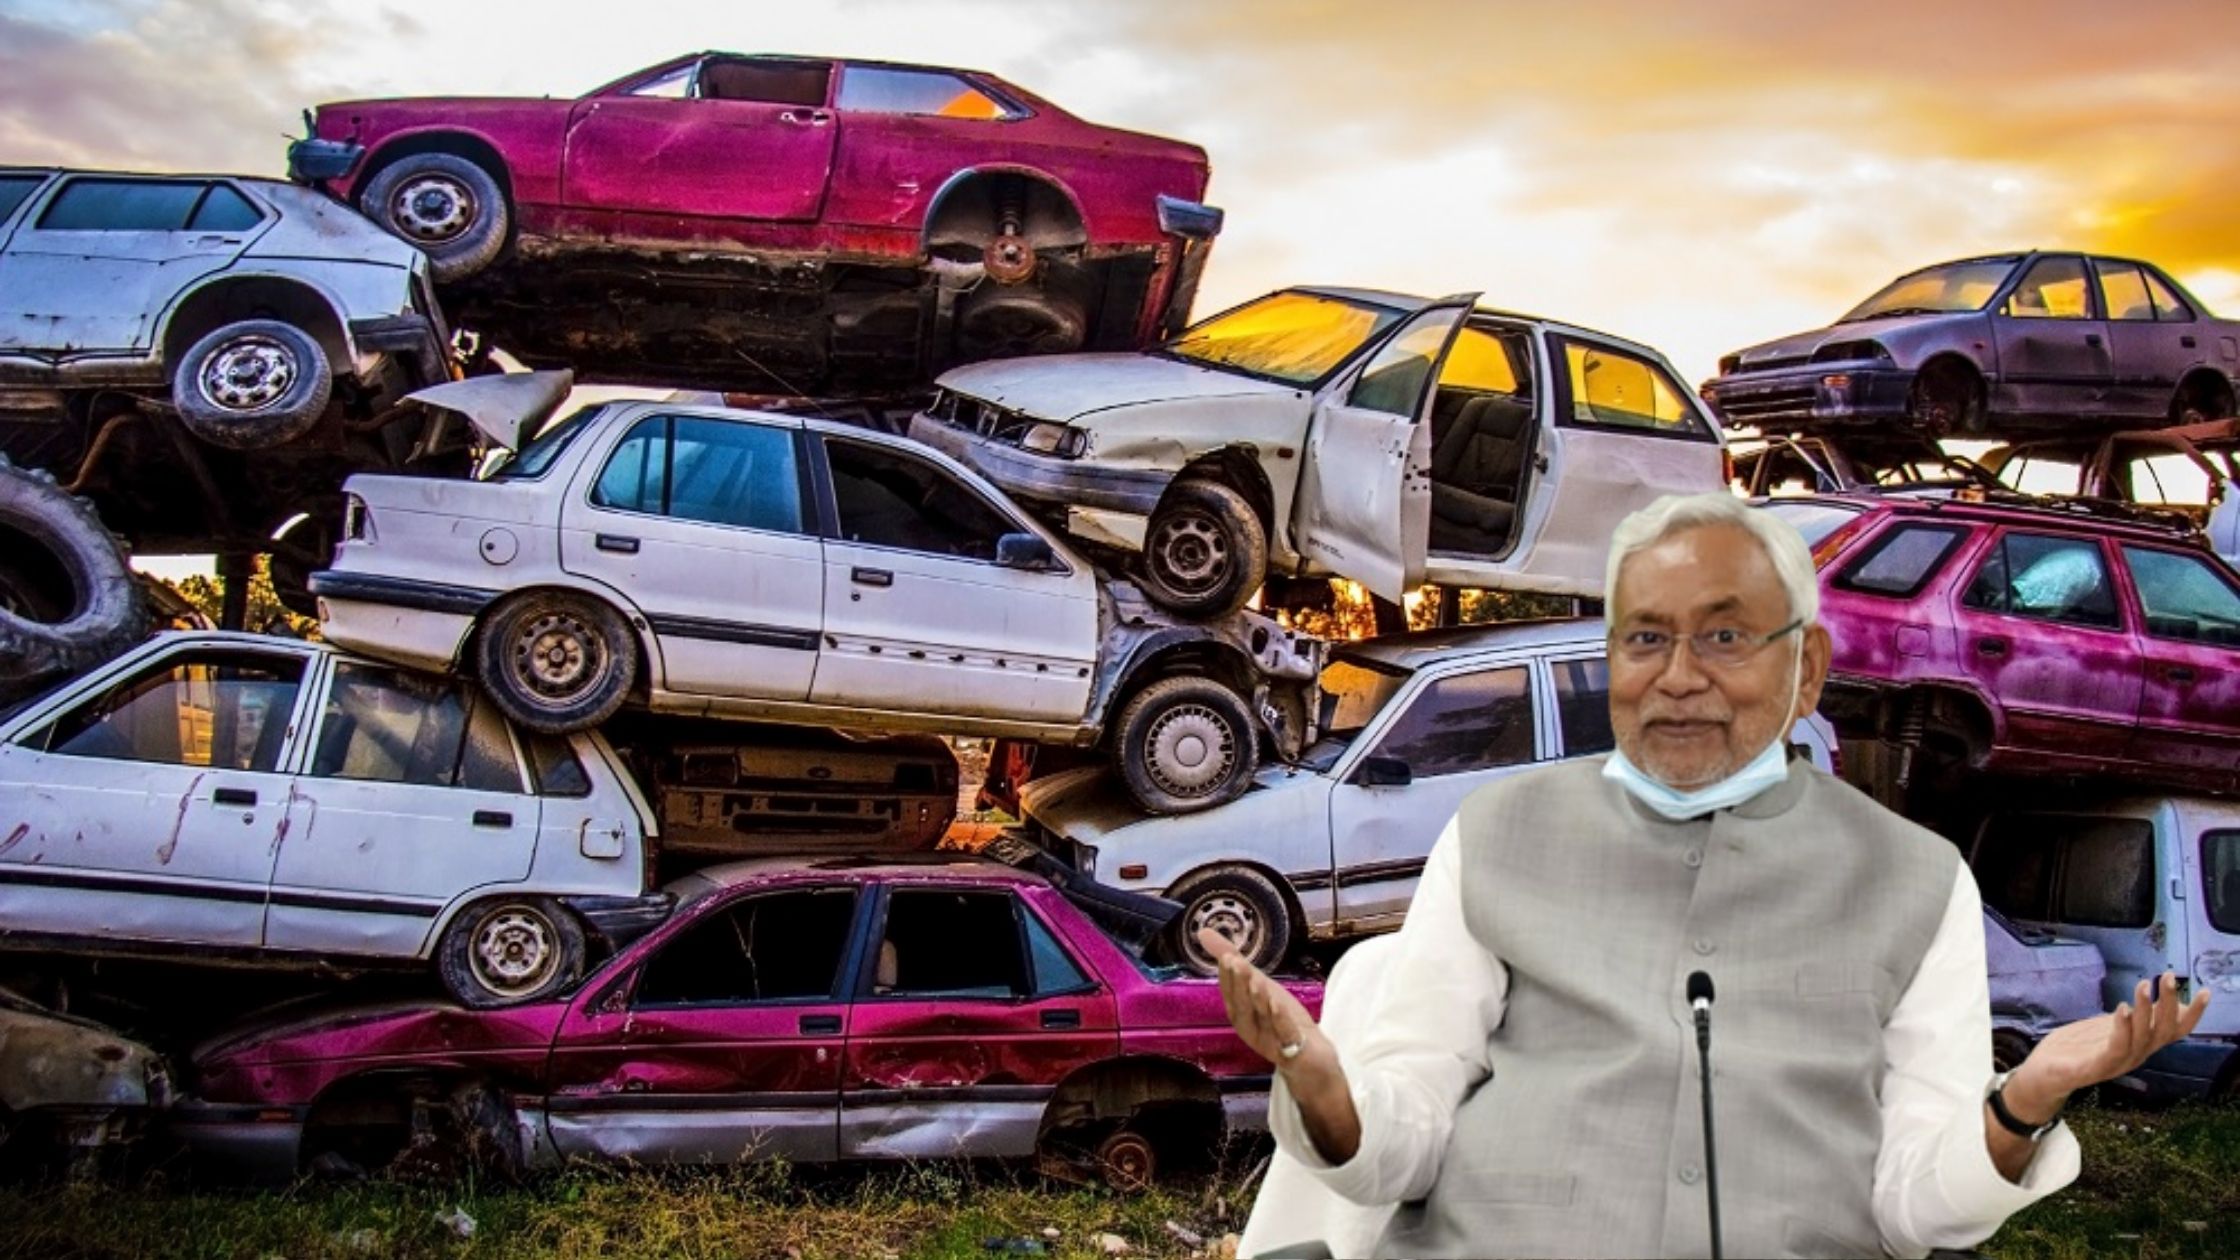 Sell old vehicles in Bihar in junk and get tax exemption for 15 years